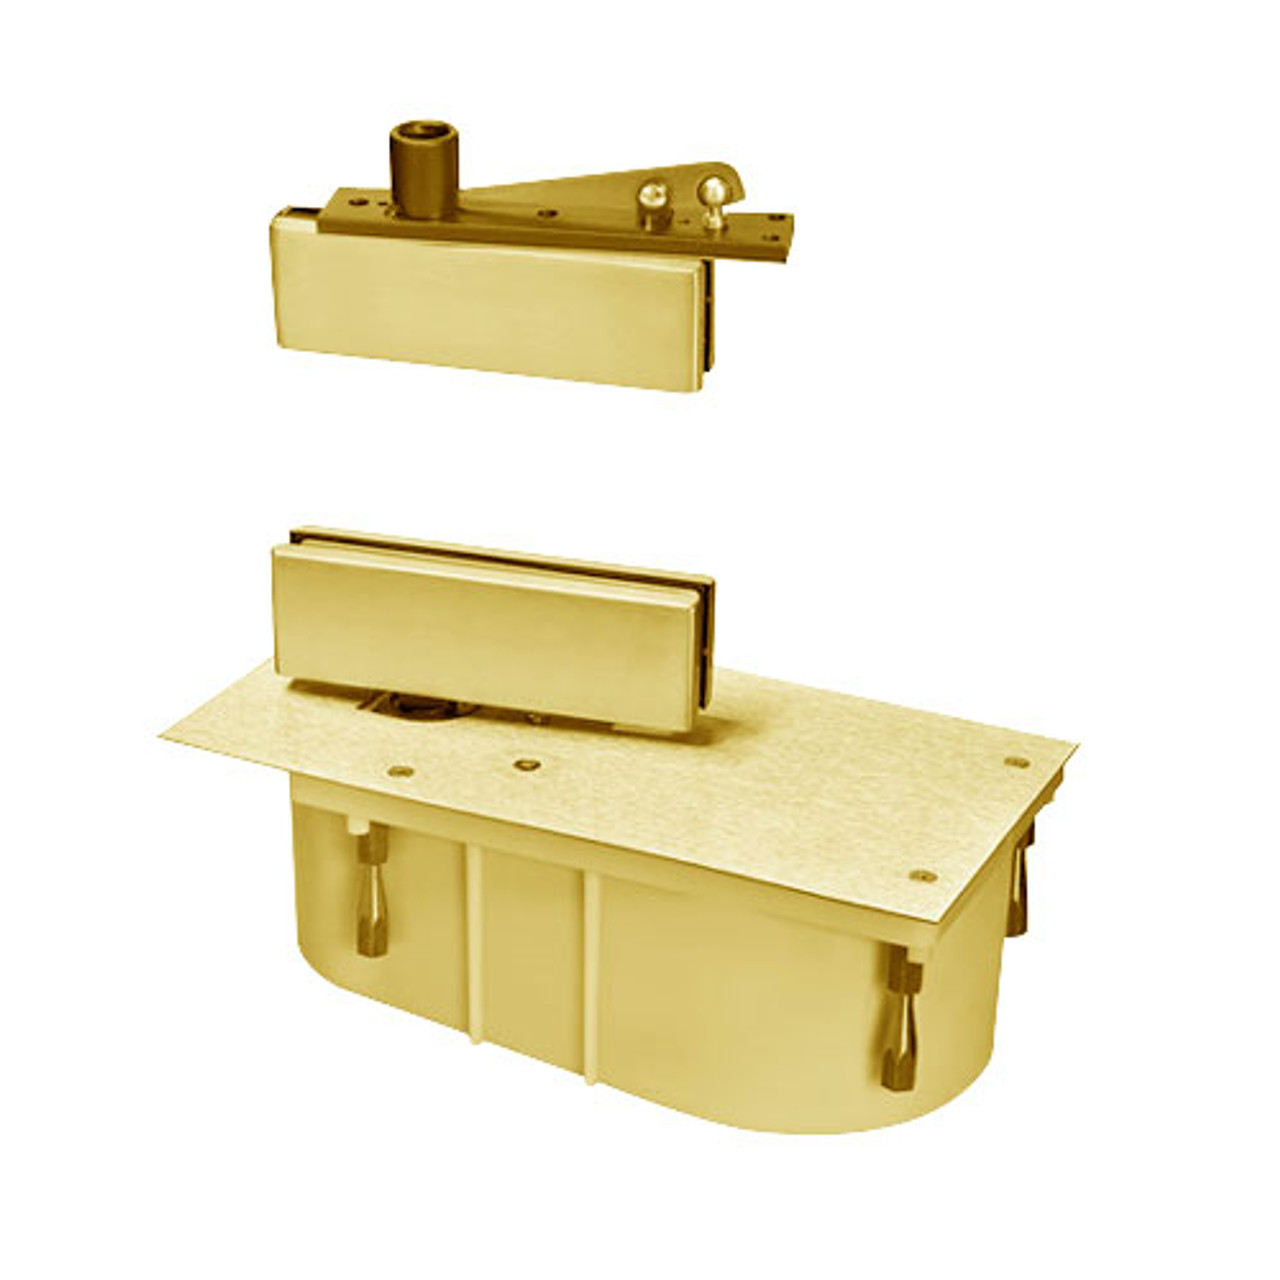 428-105S-LH-605 Rixson 428 Series Heavy Duty Single Acting Center Hung Floor Closer with Patch Fittings in Bright Brass Finish